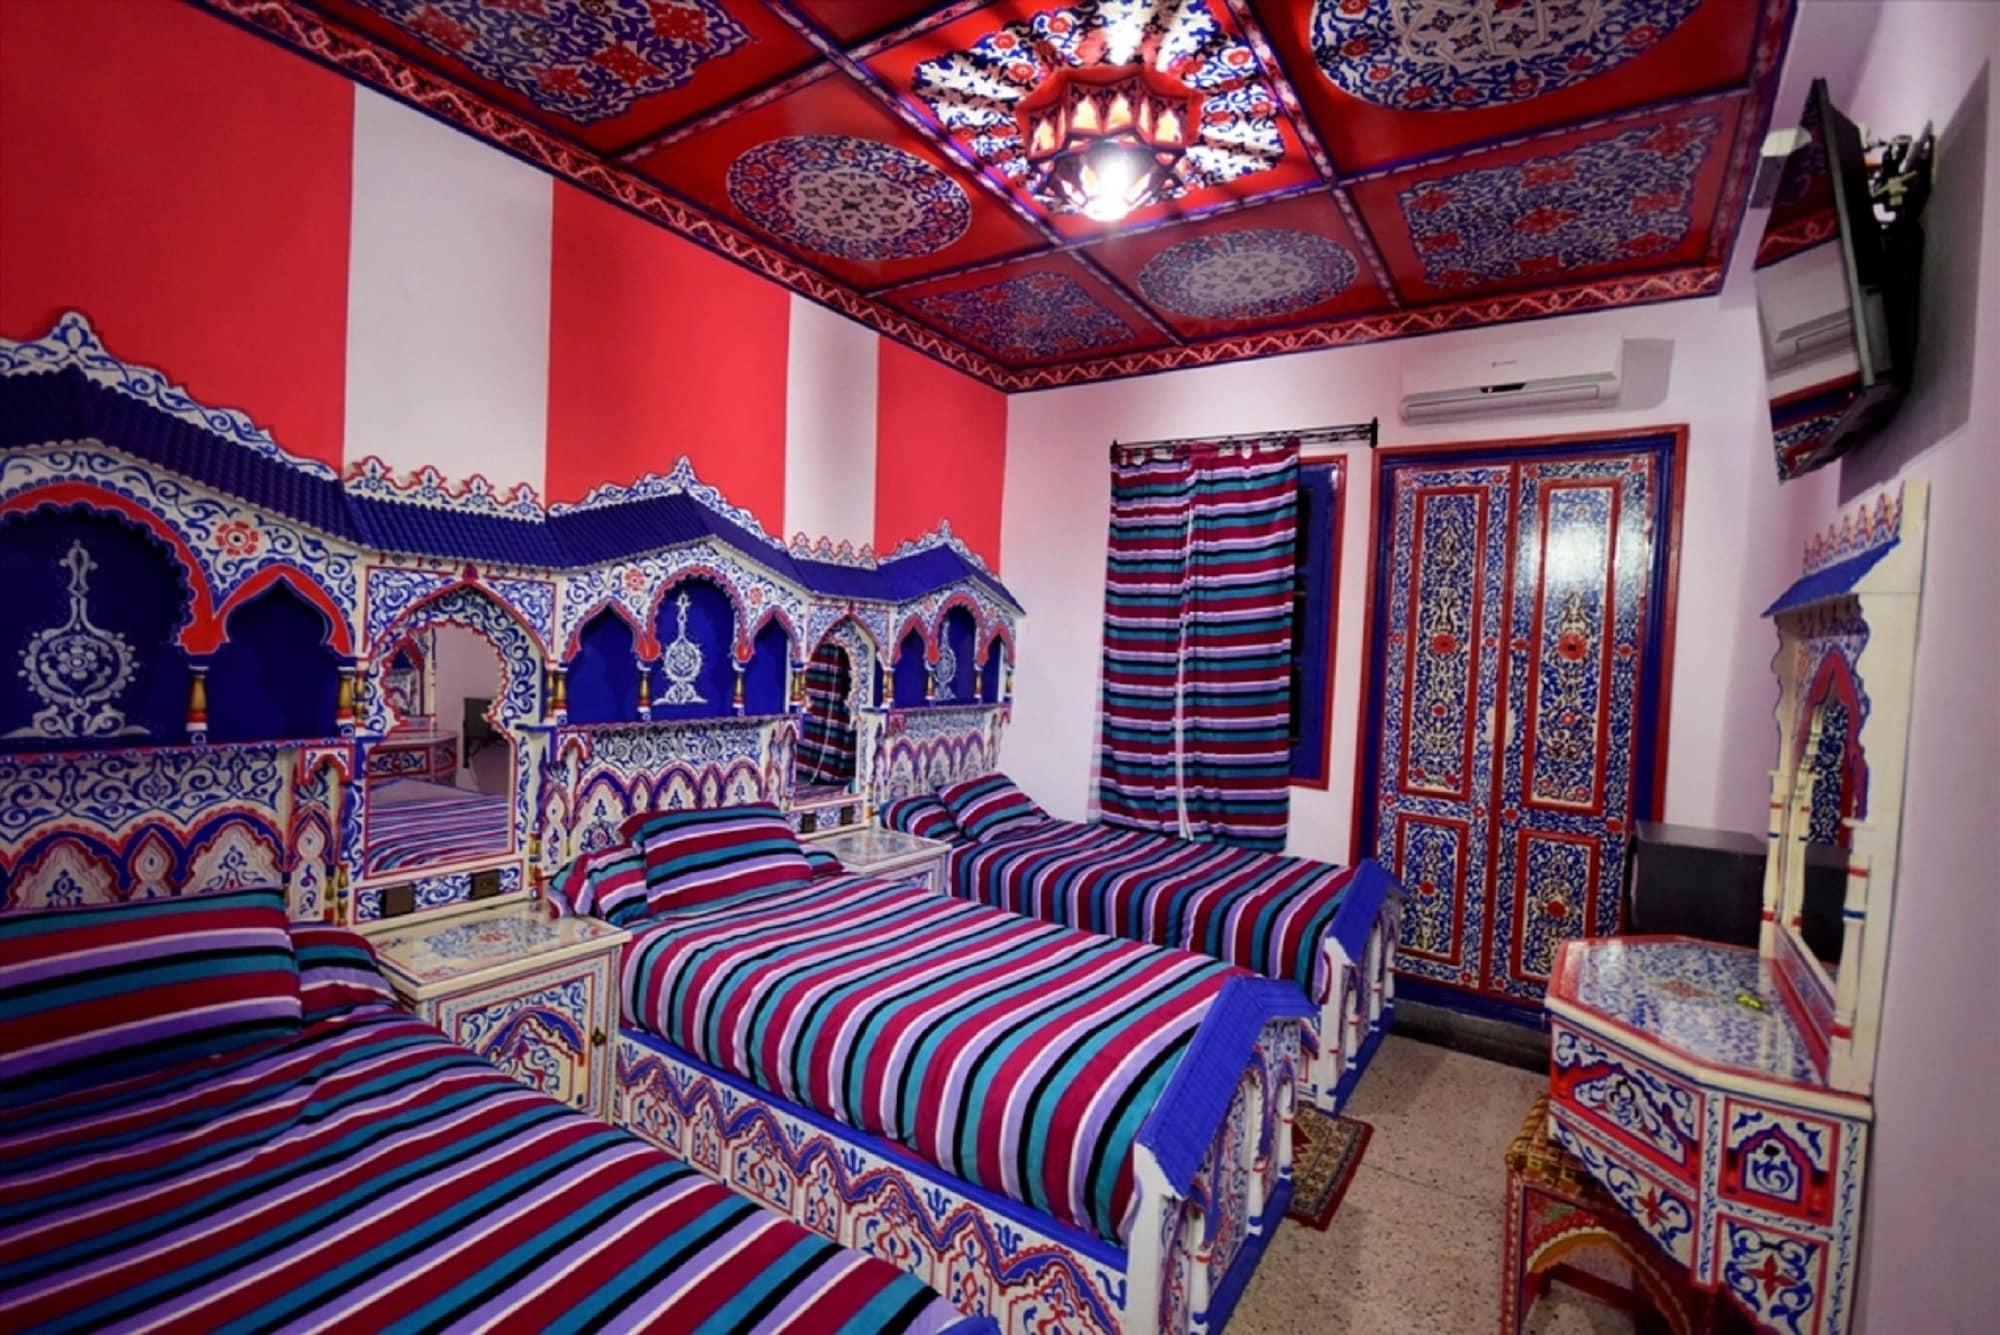 Hotel Madrid Chefchaouen Exterior photo